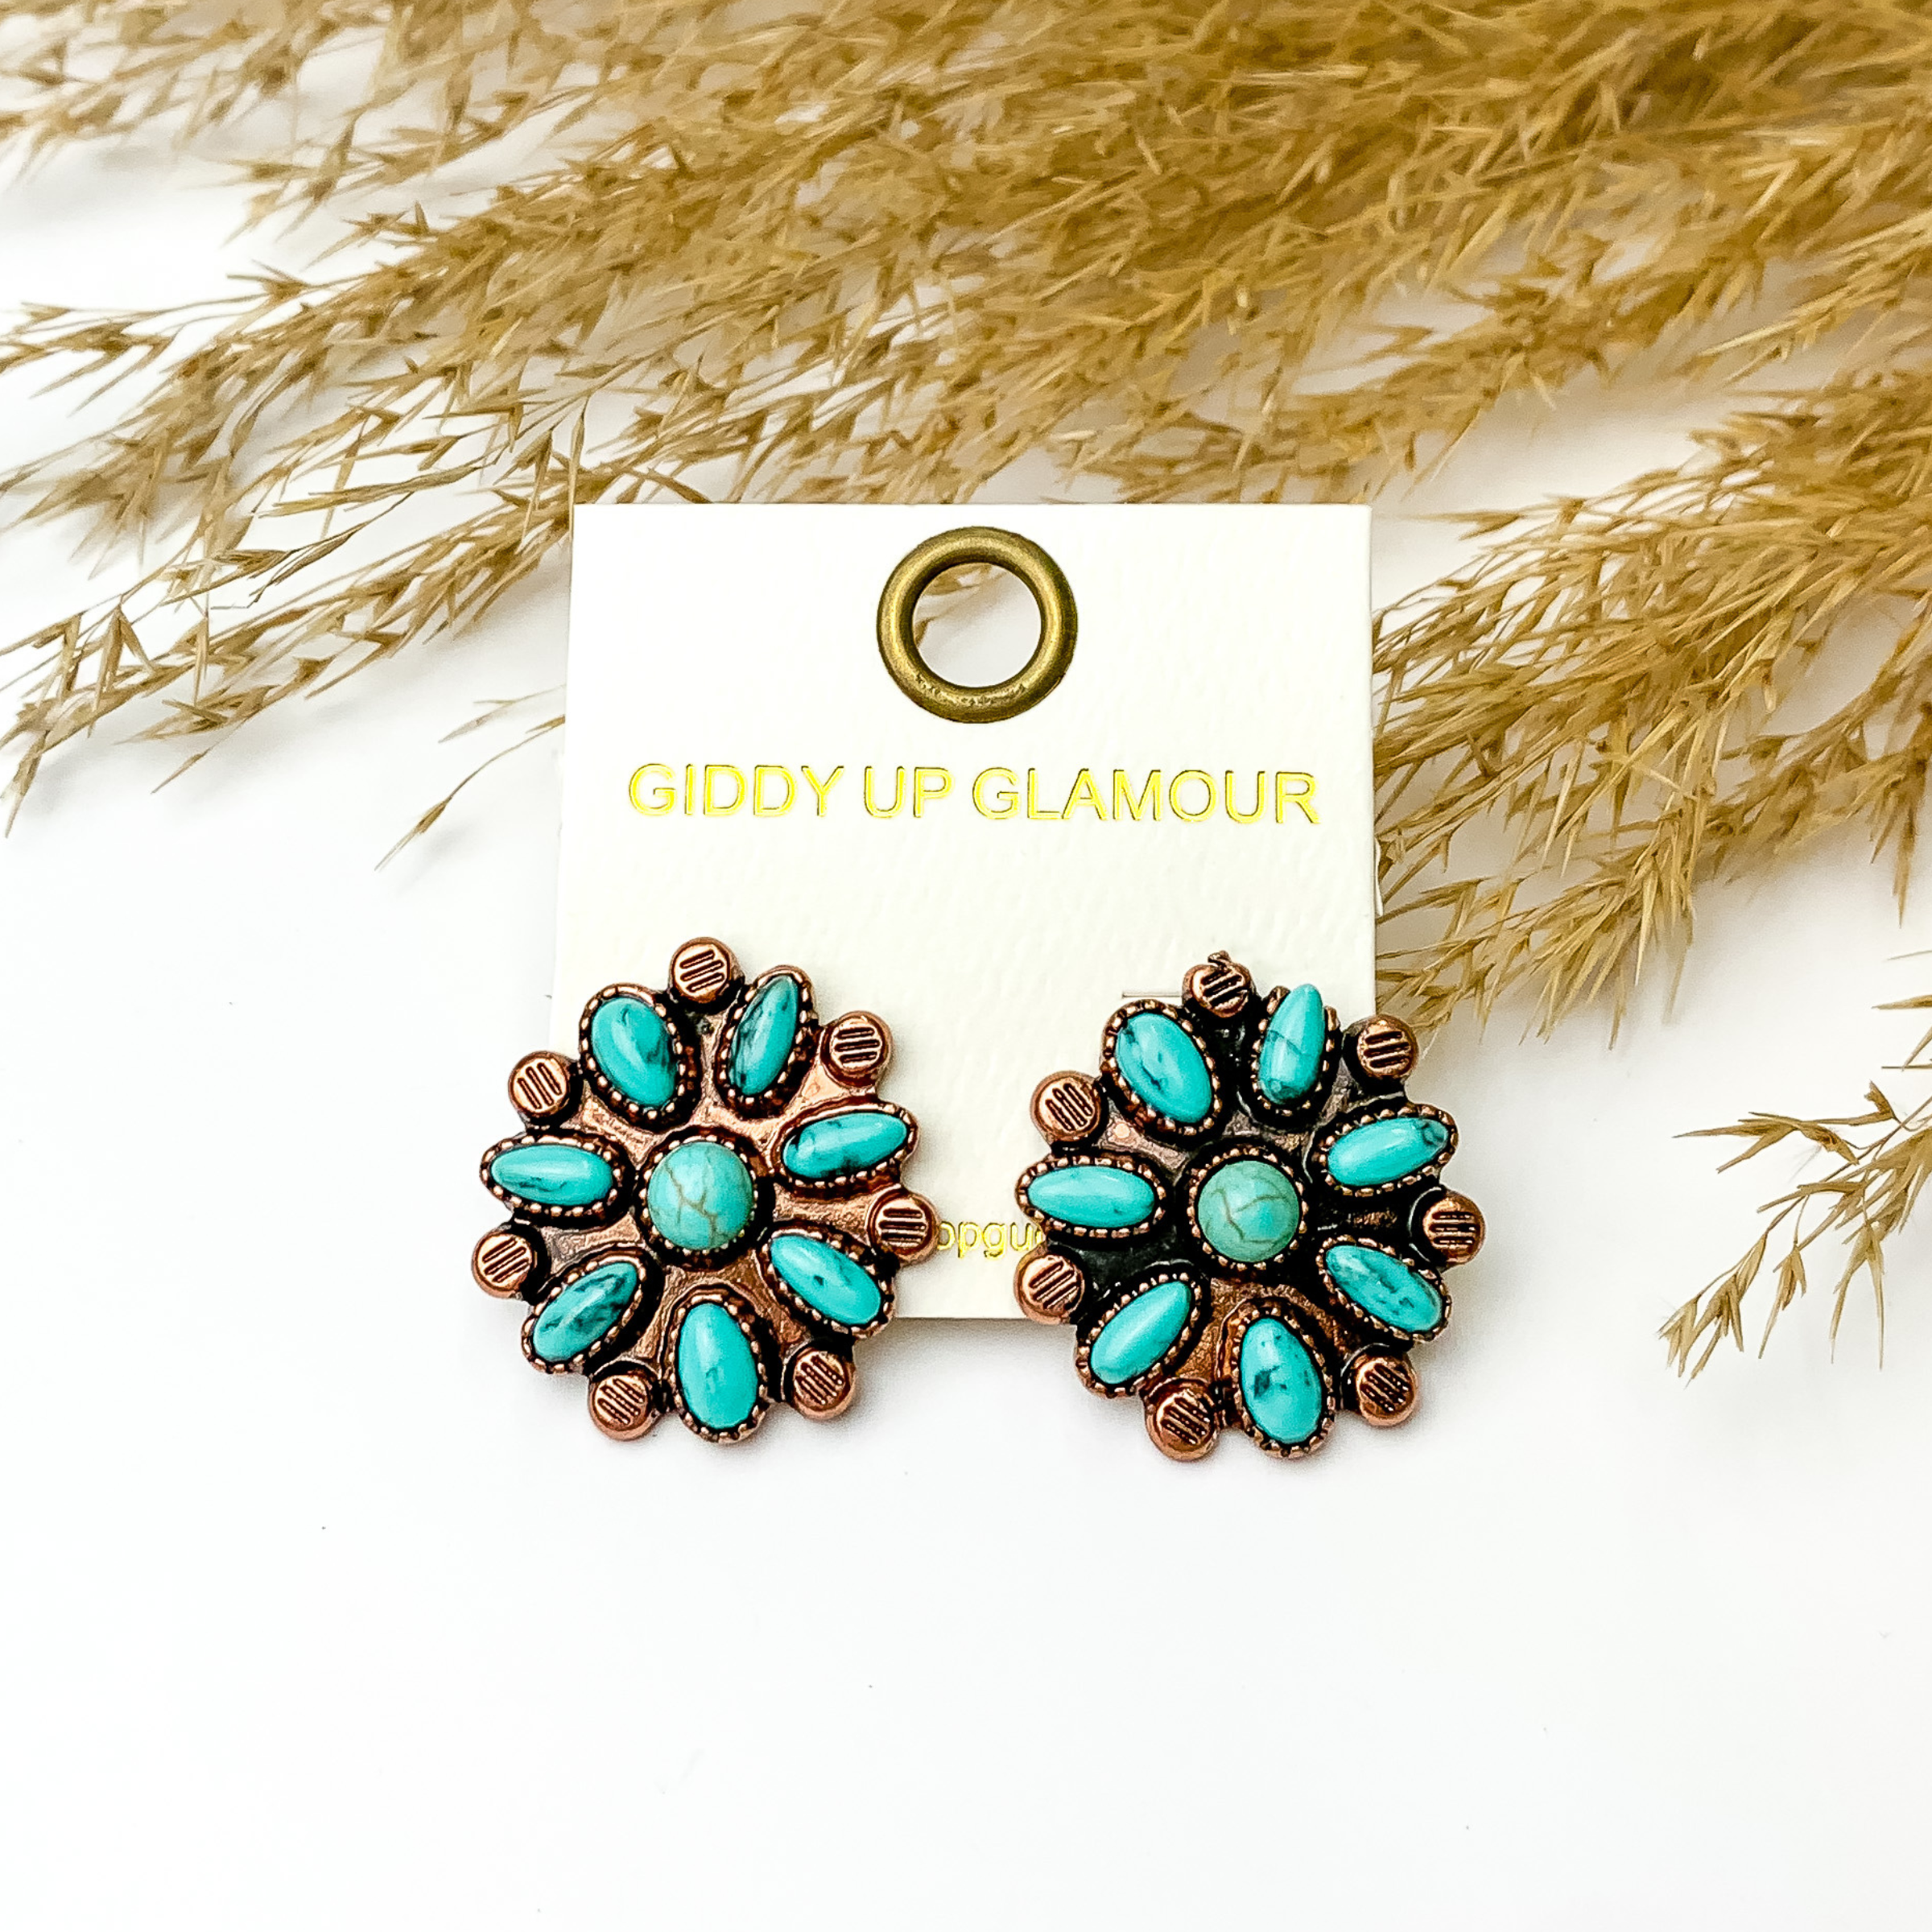 Three turquoise flower cluster stud earrings in copper. These earrings are pictured on a white background in front of tan pompous grass. 